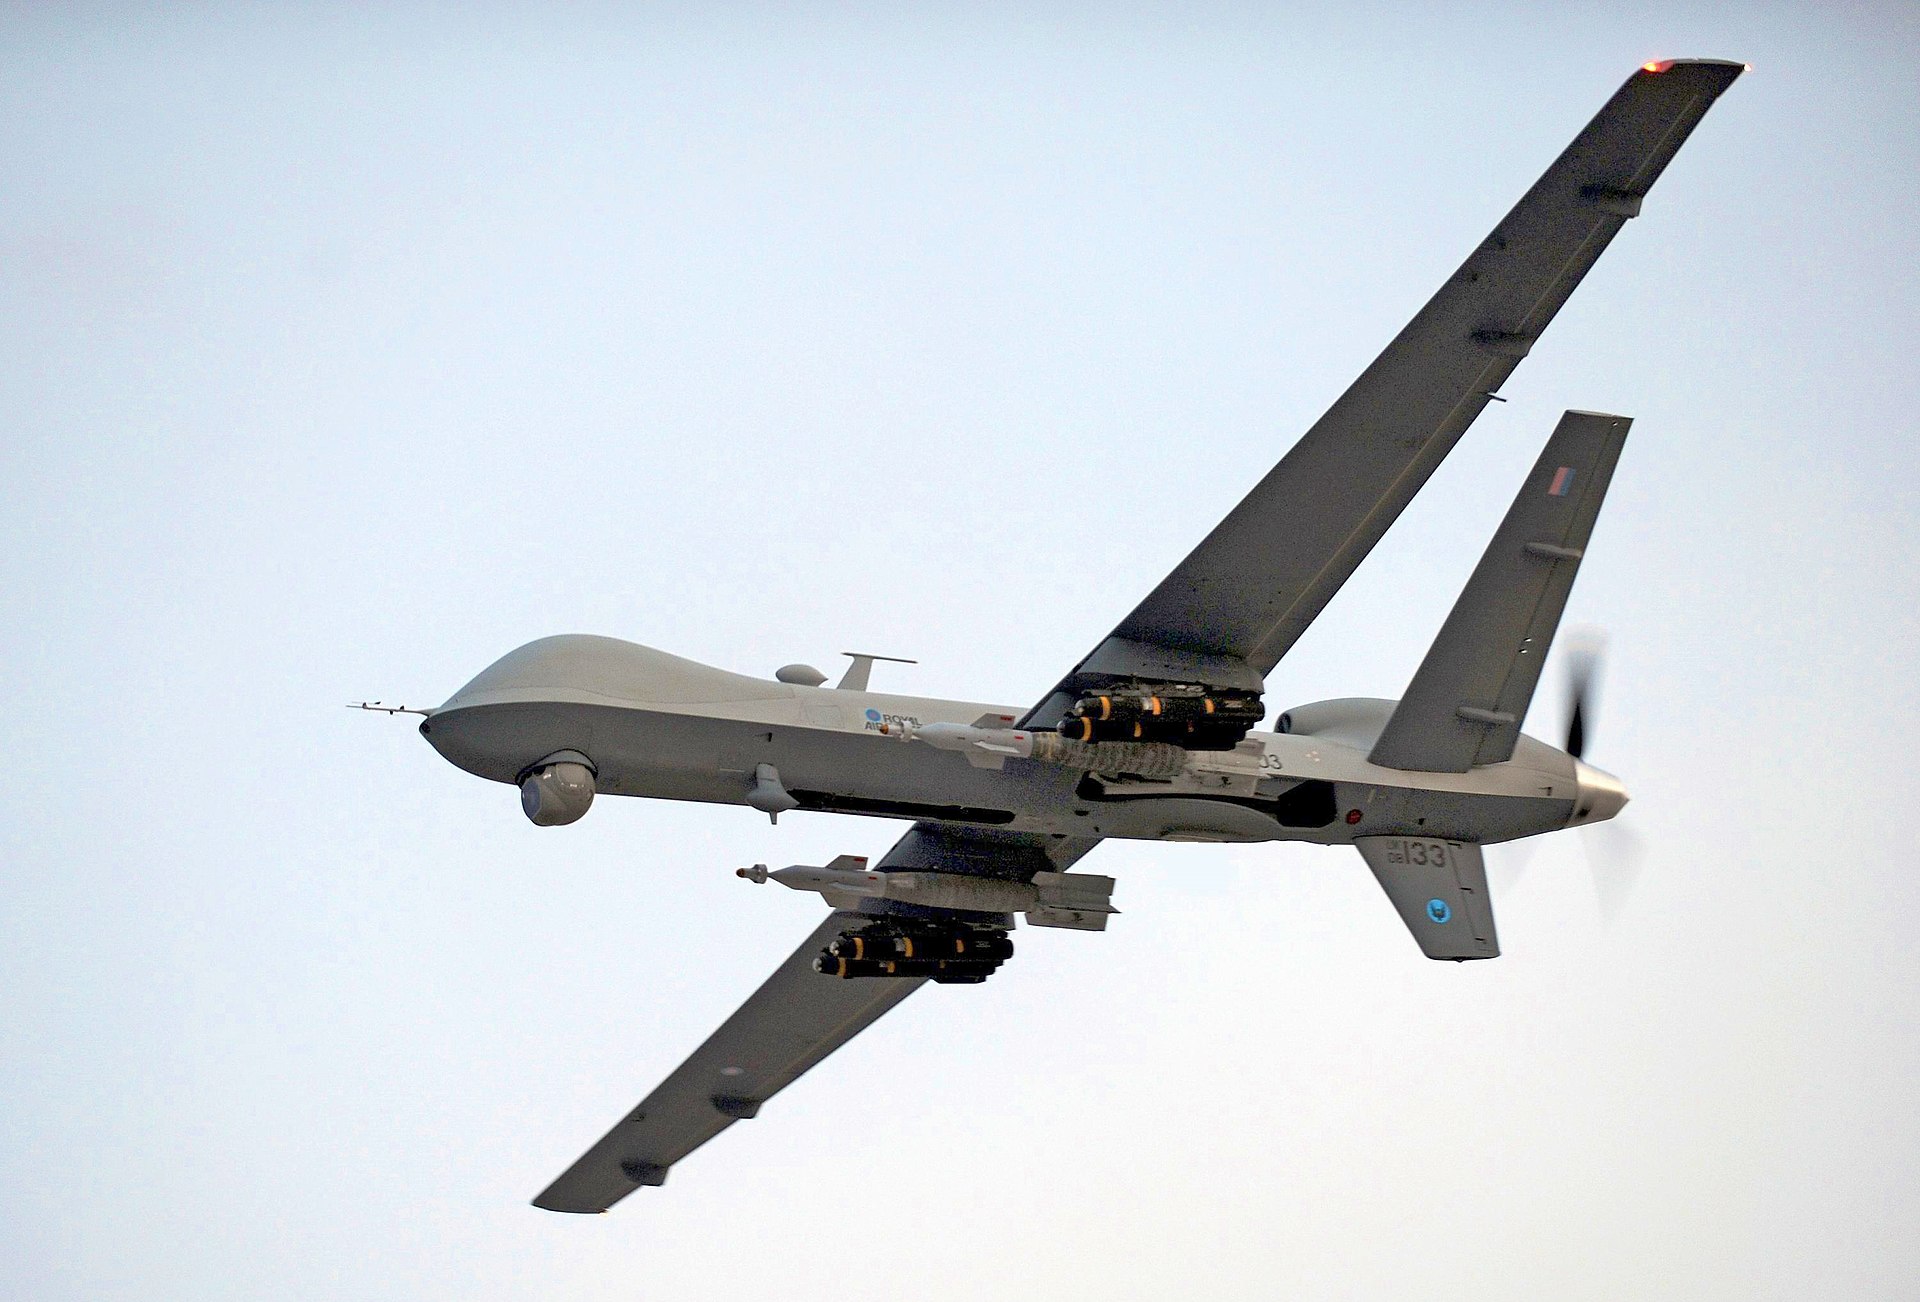 1920px-Reaper_UAV_Takes_to_the_Skies_of_Southern_Afghanistan_MOD_45151418.jpg